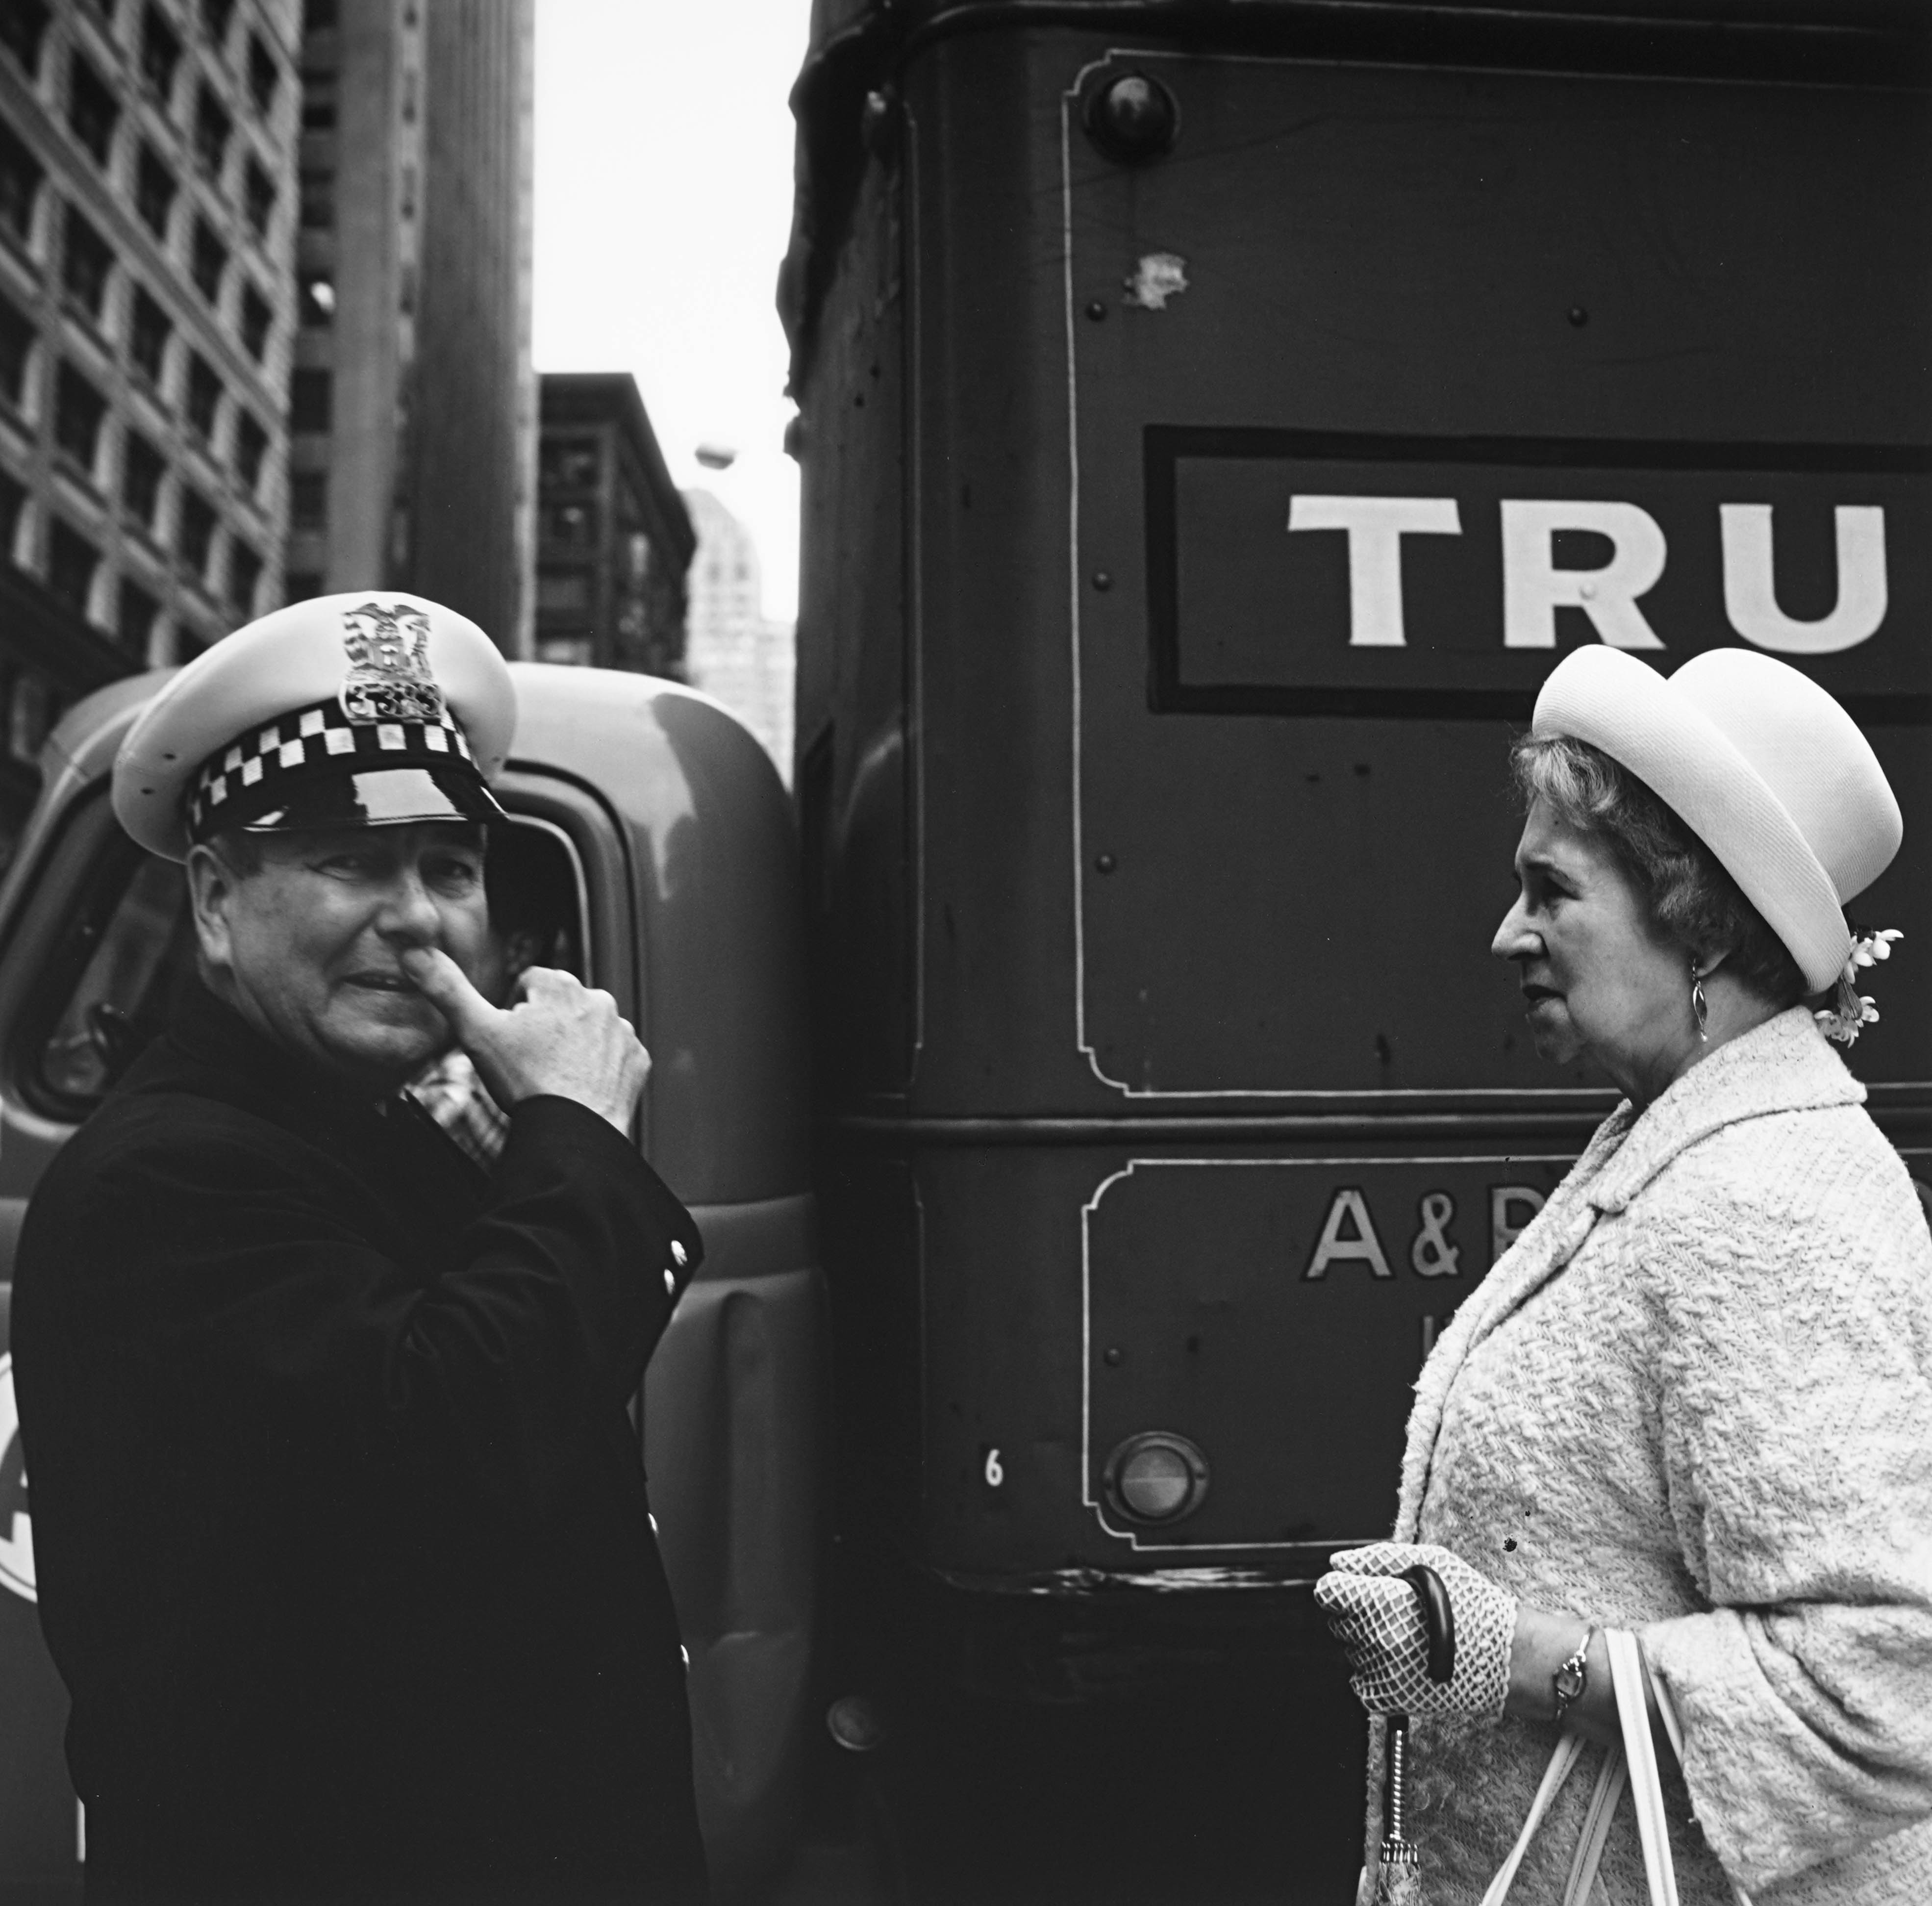 Chicago, sans date tirage argentique, 2020 © Estate of Vivian Maier, Courtesy of Maloof Collection and Howard Greenberg Gallery, NY